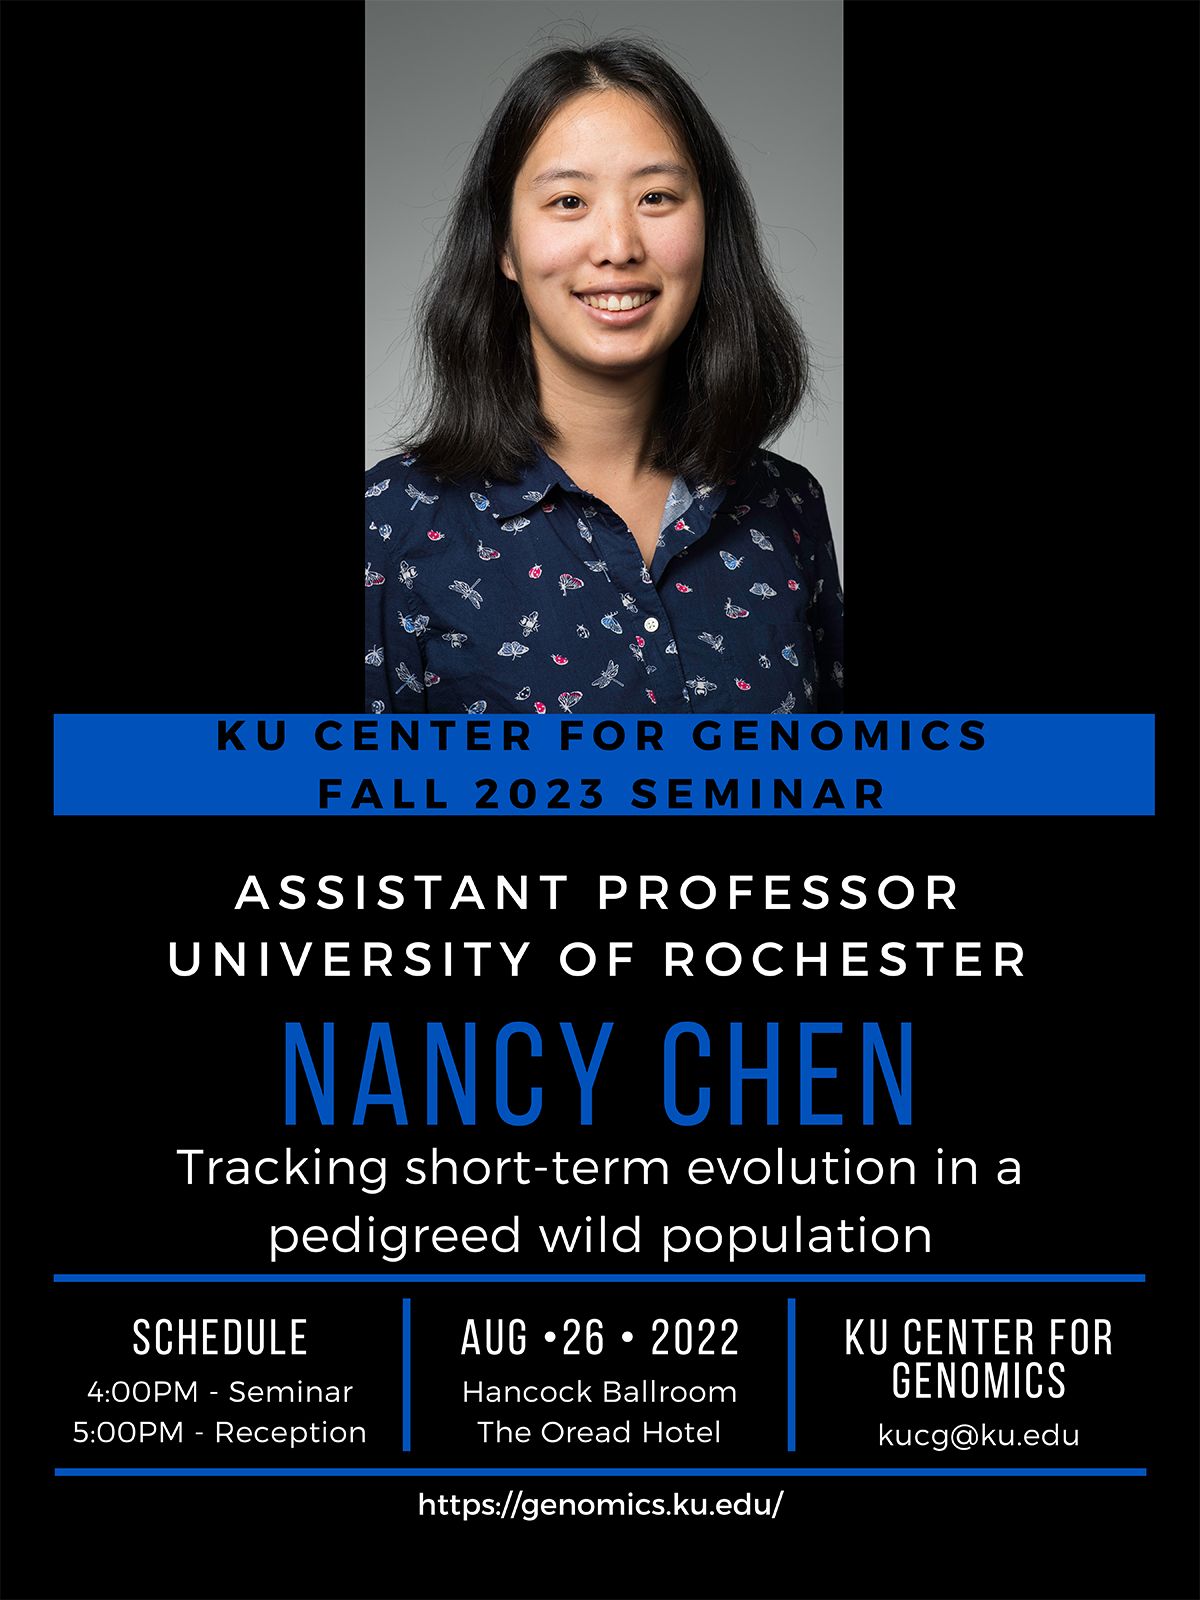 Poster advertising Aug. 26, 2022 KU Center for Genomics seminar featuring Nancy Chen from the University of Rochester